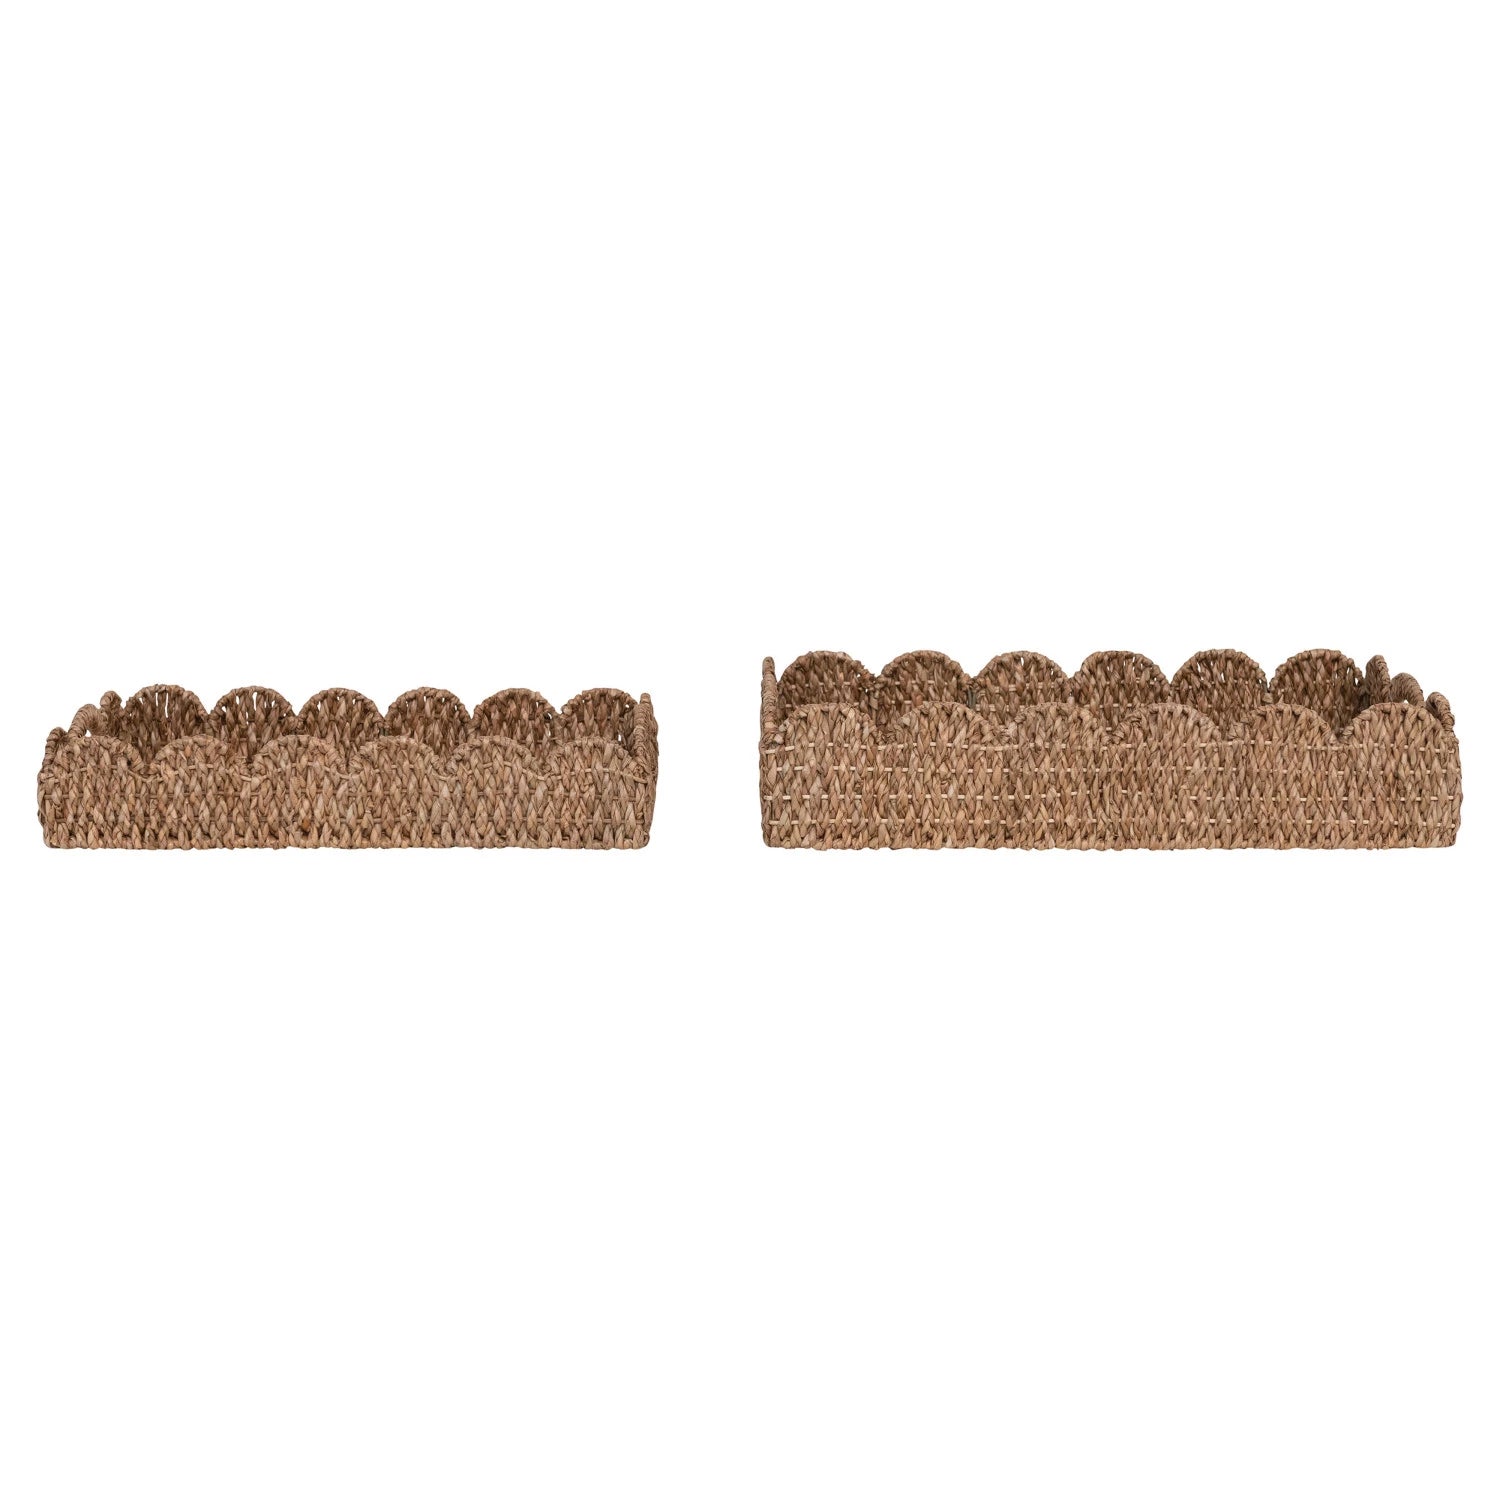 Decorative Braided Bankuan Trays with Handles & Scalloped Edge, Set of 2